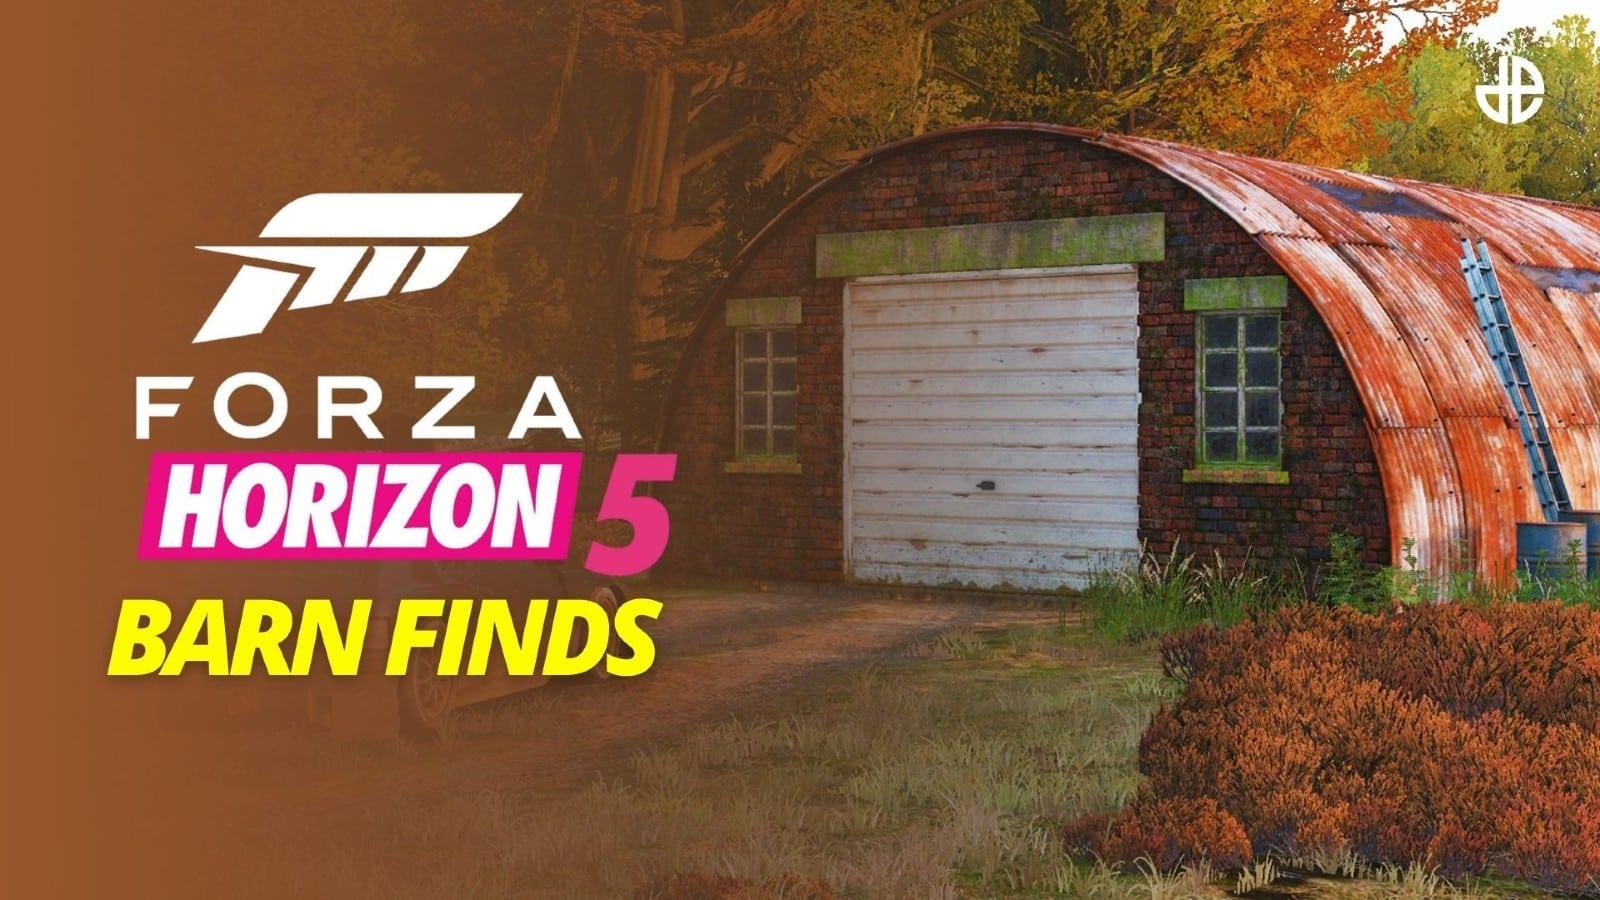 A barn in Forza Horizon 5 that stores a secret car within.